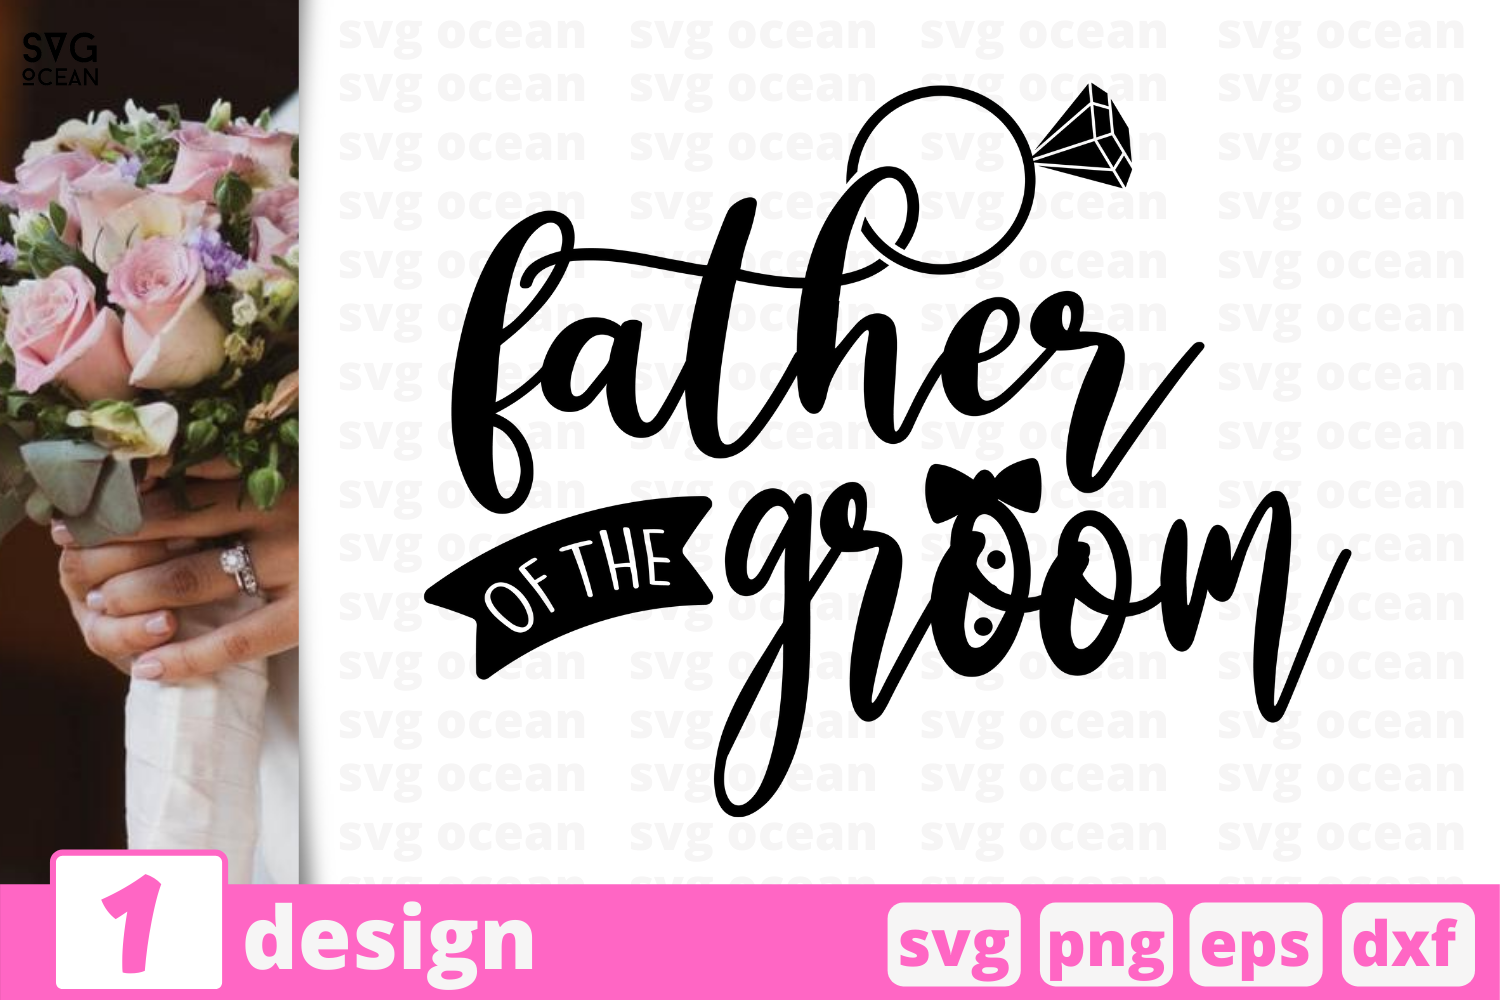 Download 1 Father Of The Groom Wedding Quotes Cricut Svg By Svgocean Thehungryjpeg Com